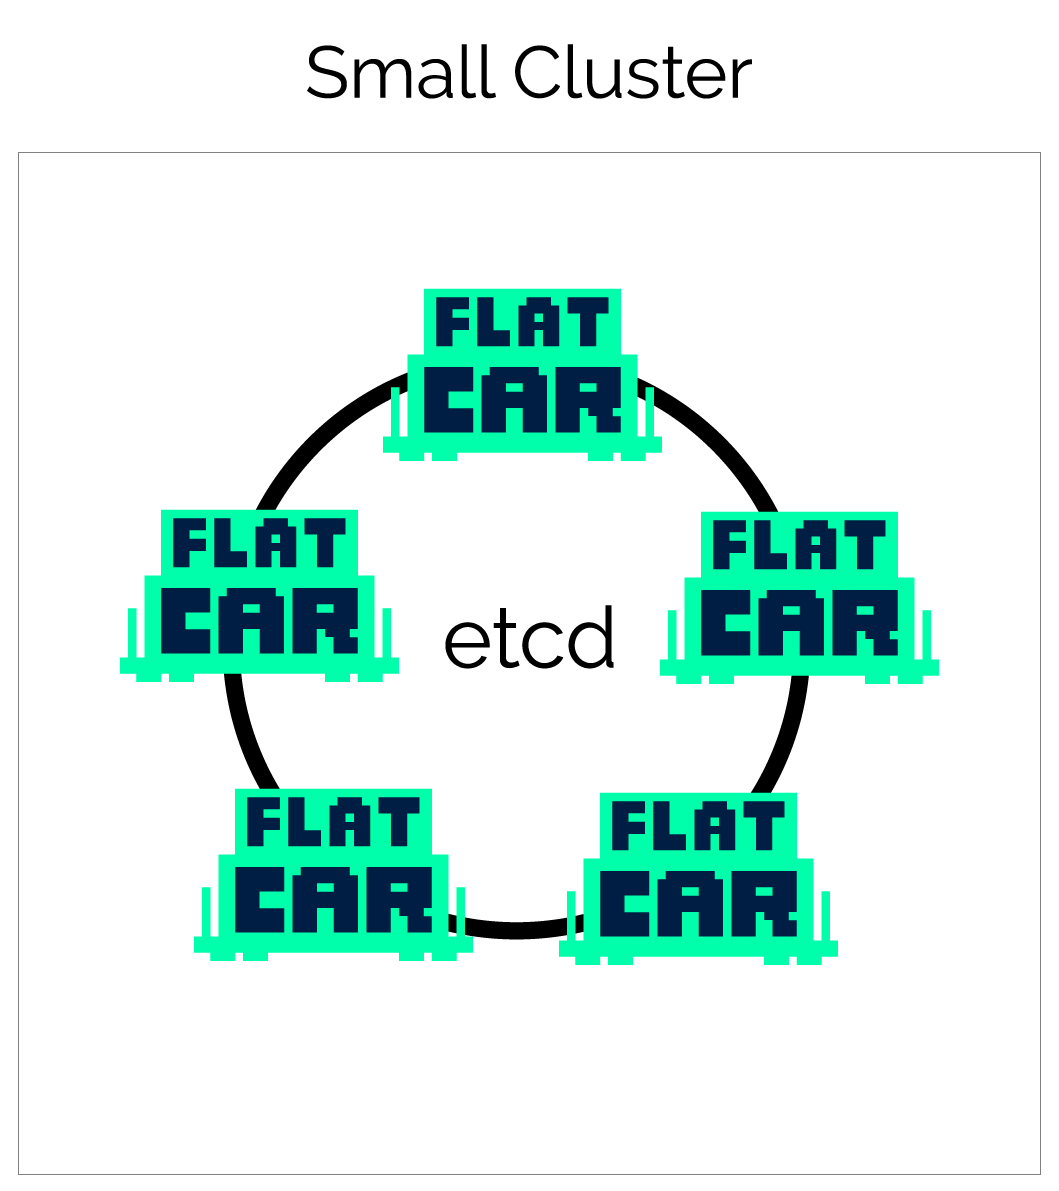 Small Flatcar Container Linux Cluster Diagram